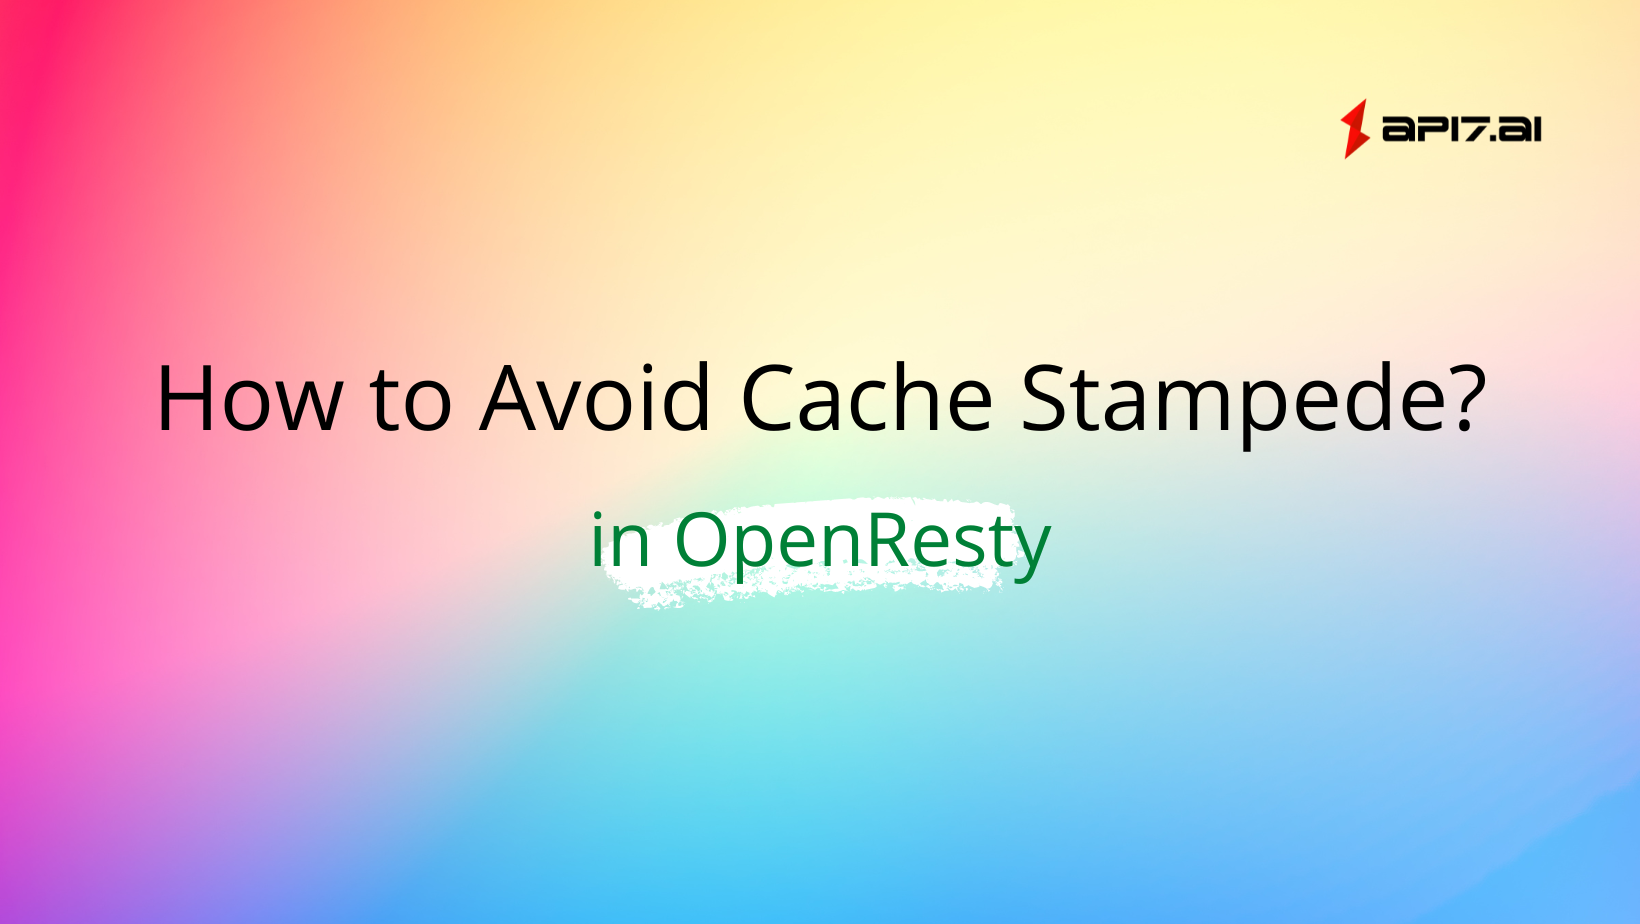 How to Avoid Cache Stampede?